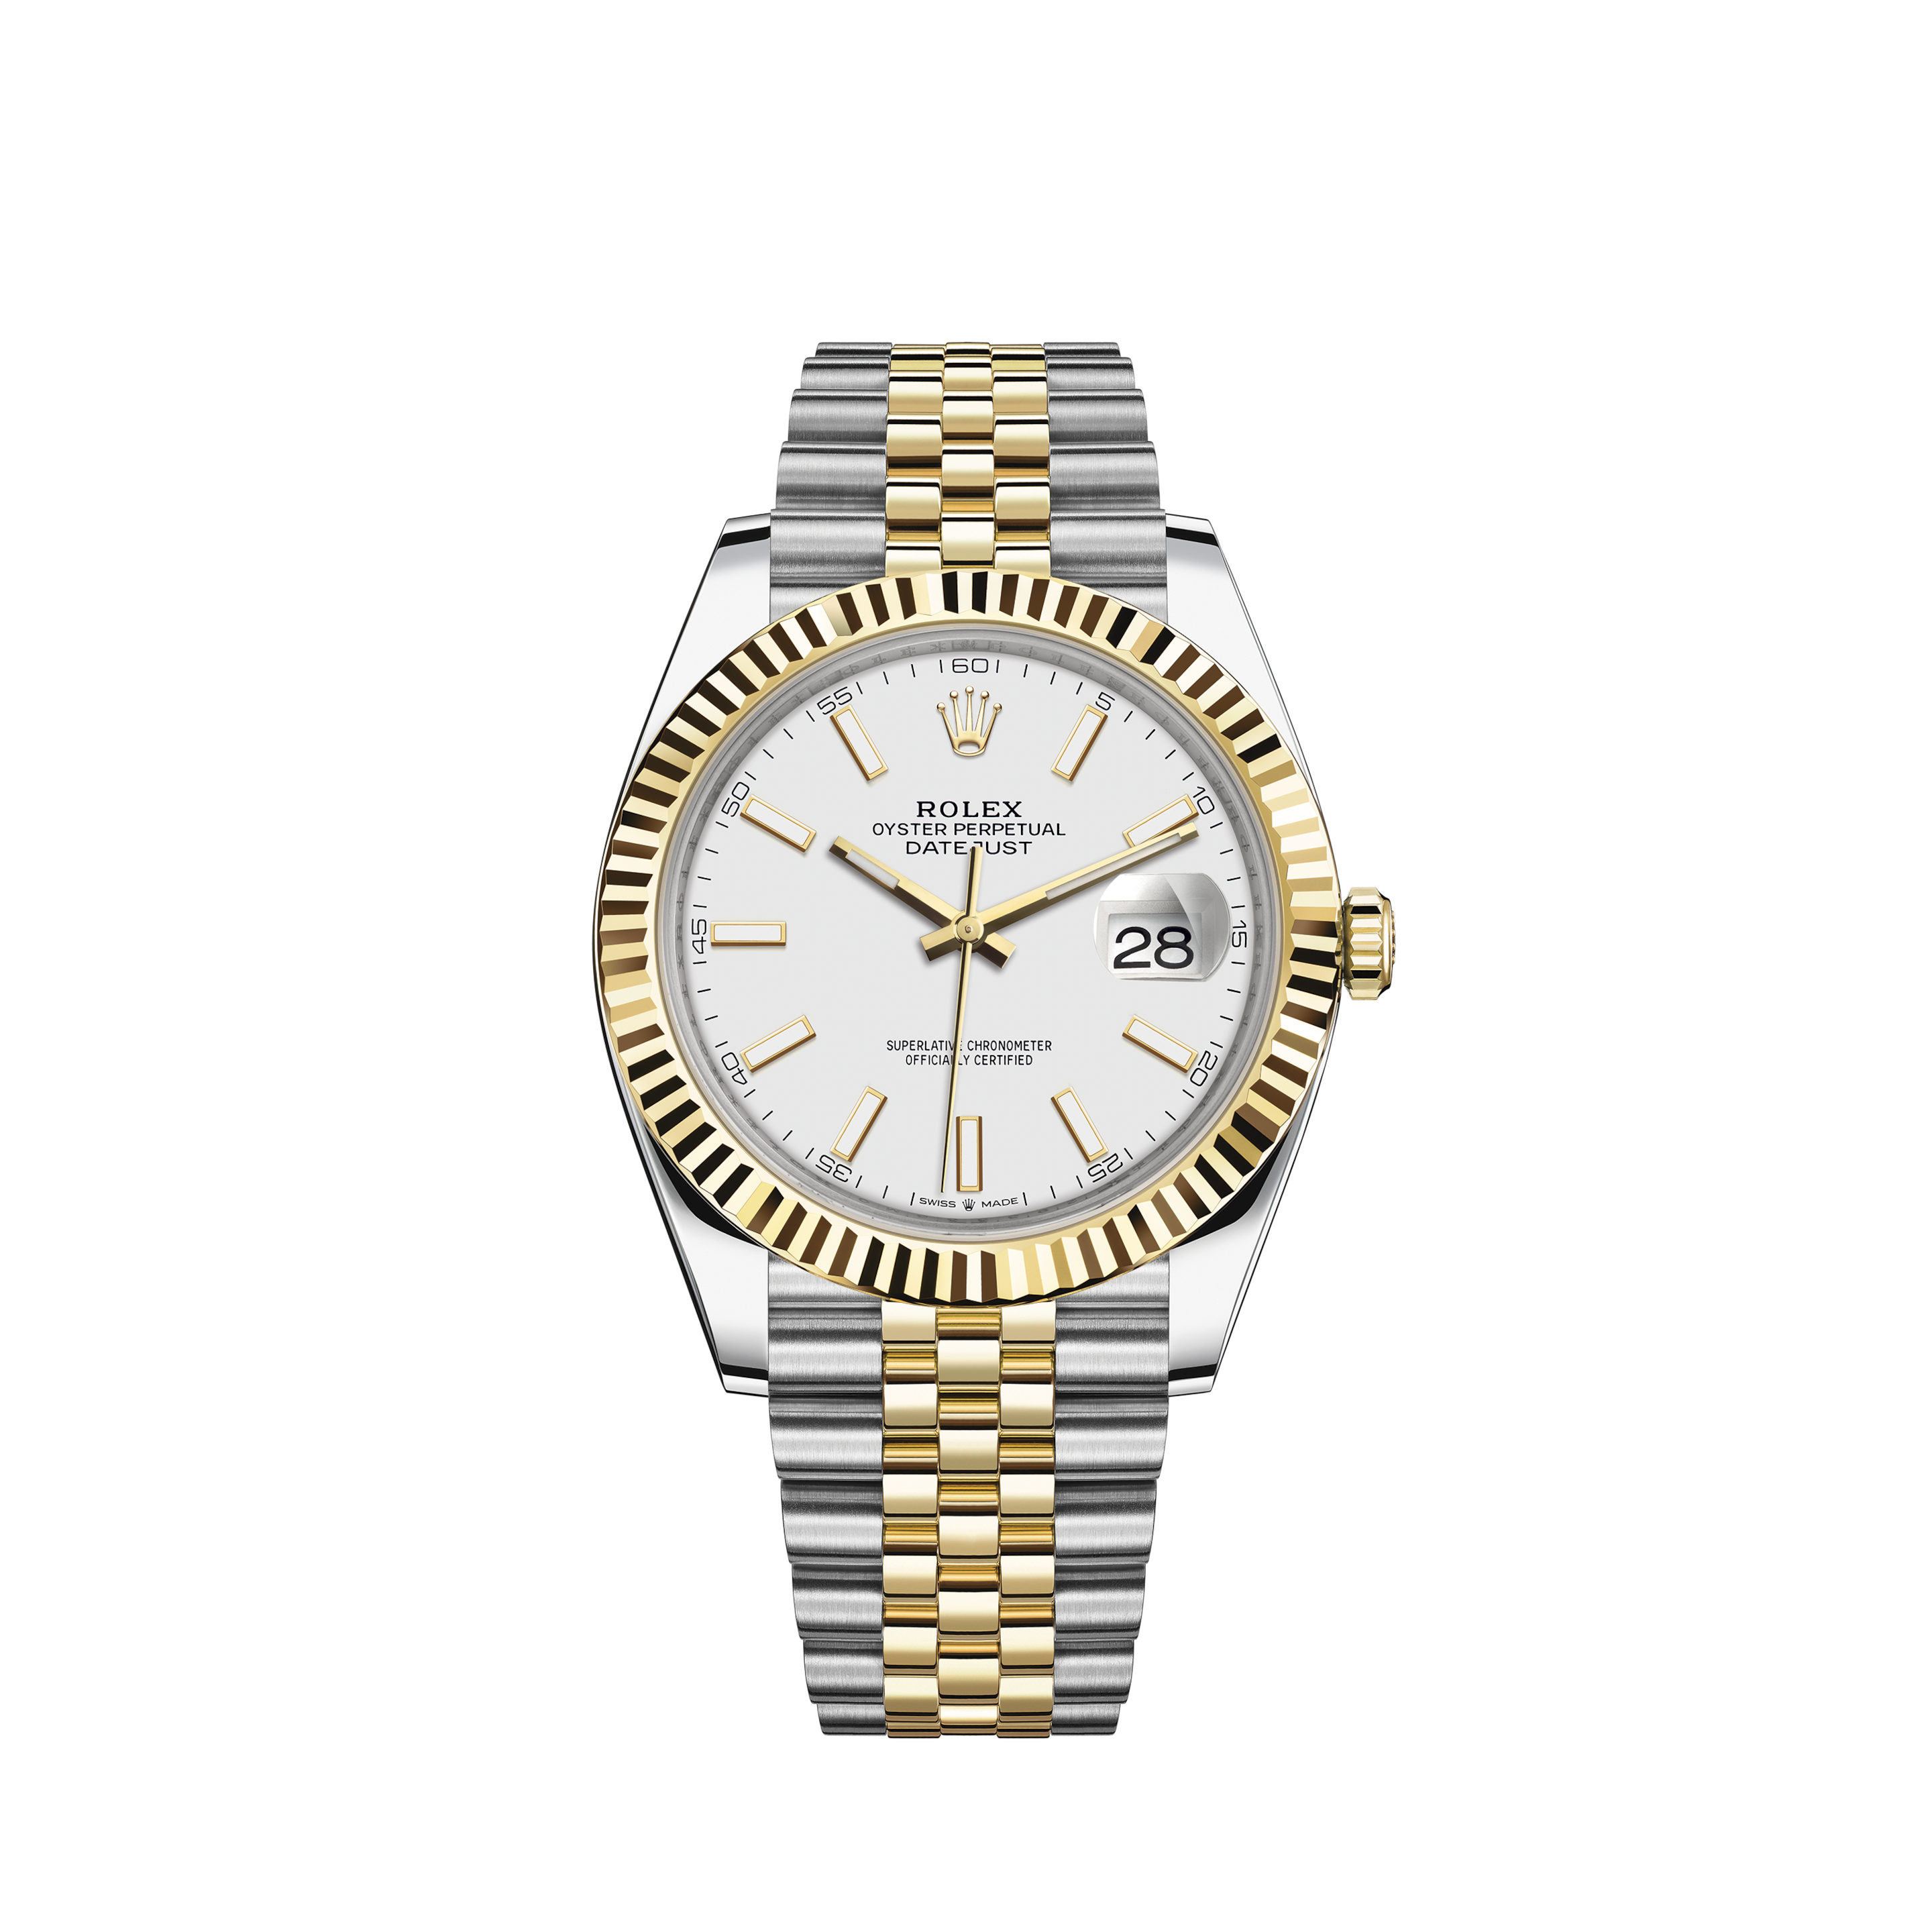 Rolex Women's New Style Steel Datejust with Custom White Diamond DialRolex Women's New Style Two-Tone Datejust with Custom Black Diamond Dial